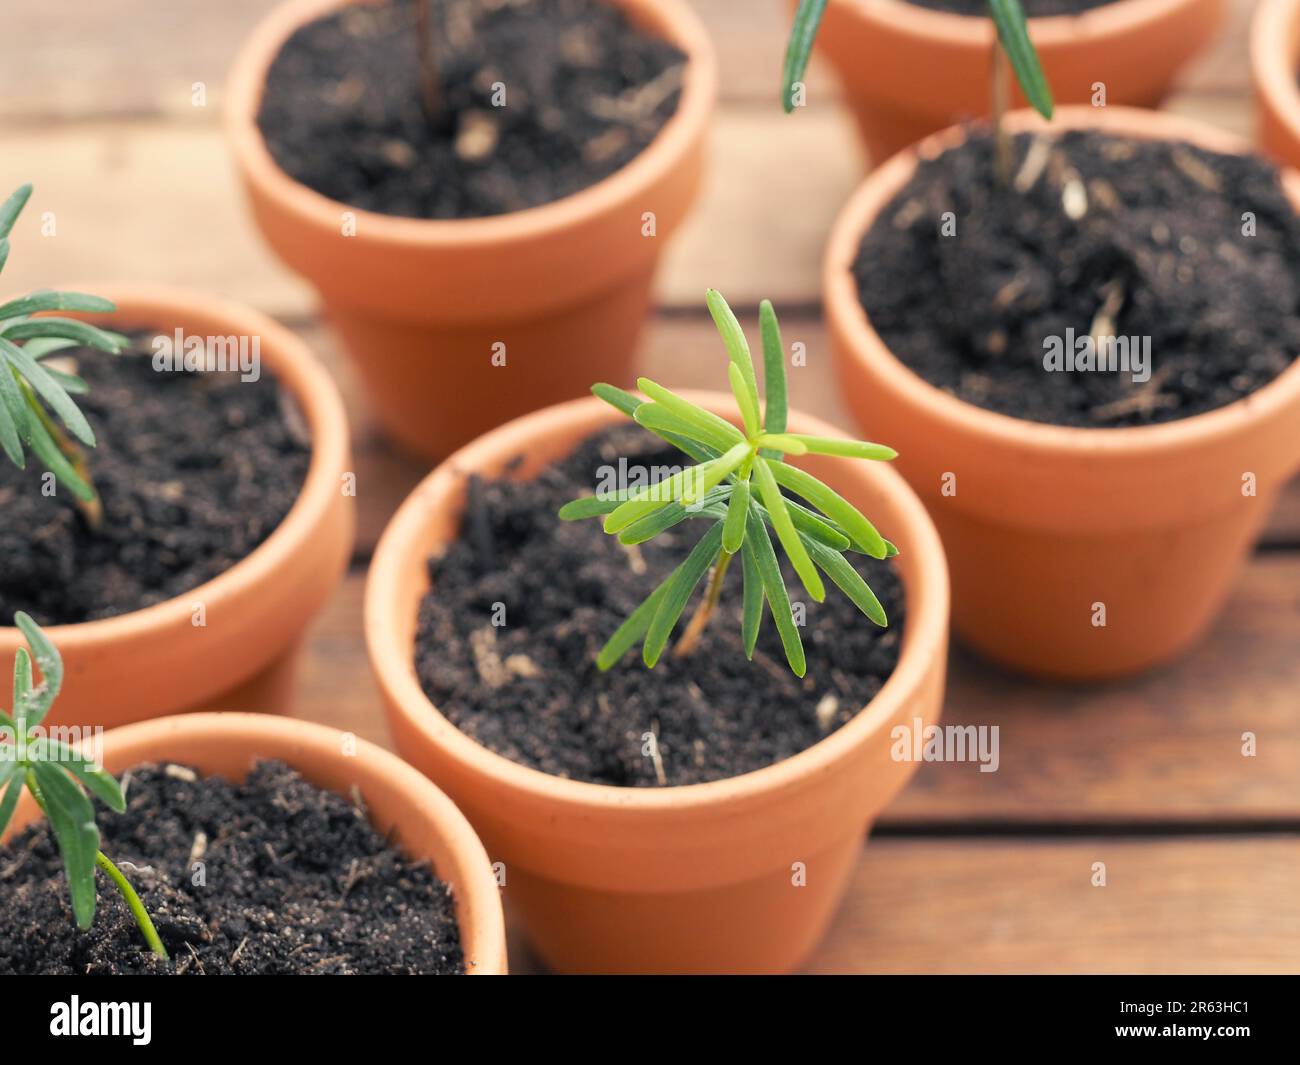 Small seedlings of the Nordmann fir in plant pots on a plant table, gardening or forestry concept, environmental protection, nature conservation Stock Photo